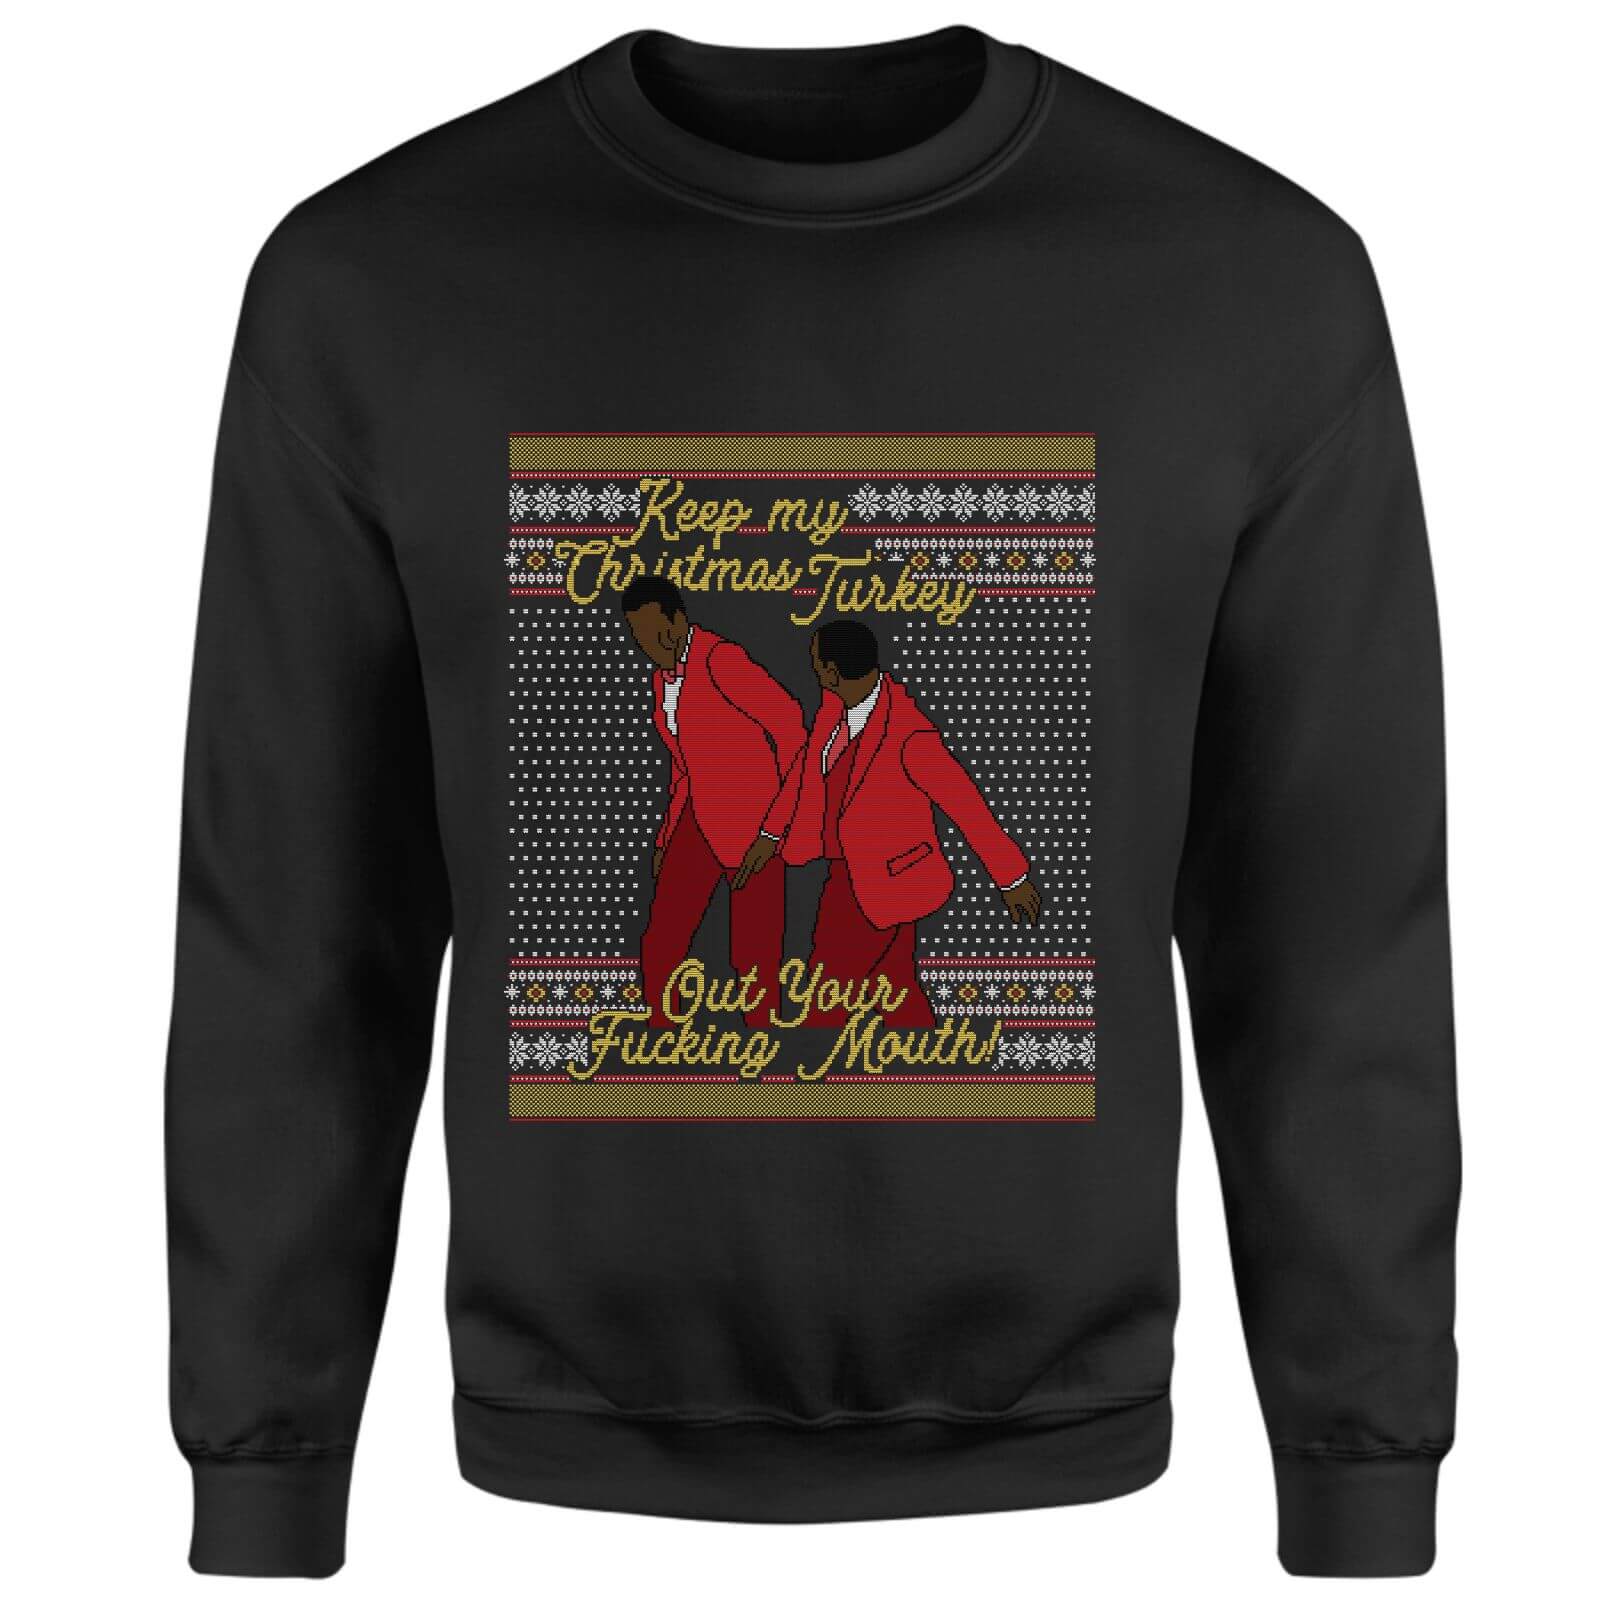 Keep My Christmas Turkey Out Your Fucking Mouth Will Smith Sweatshirt - Black - S - Black